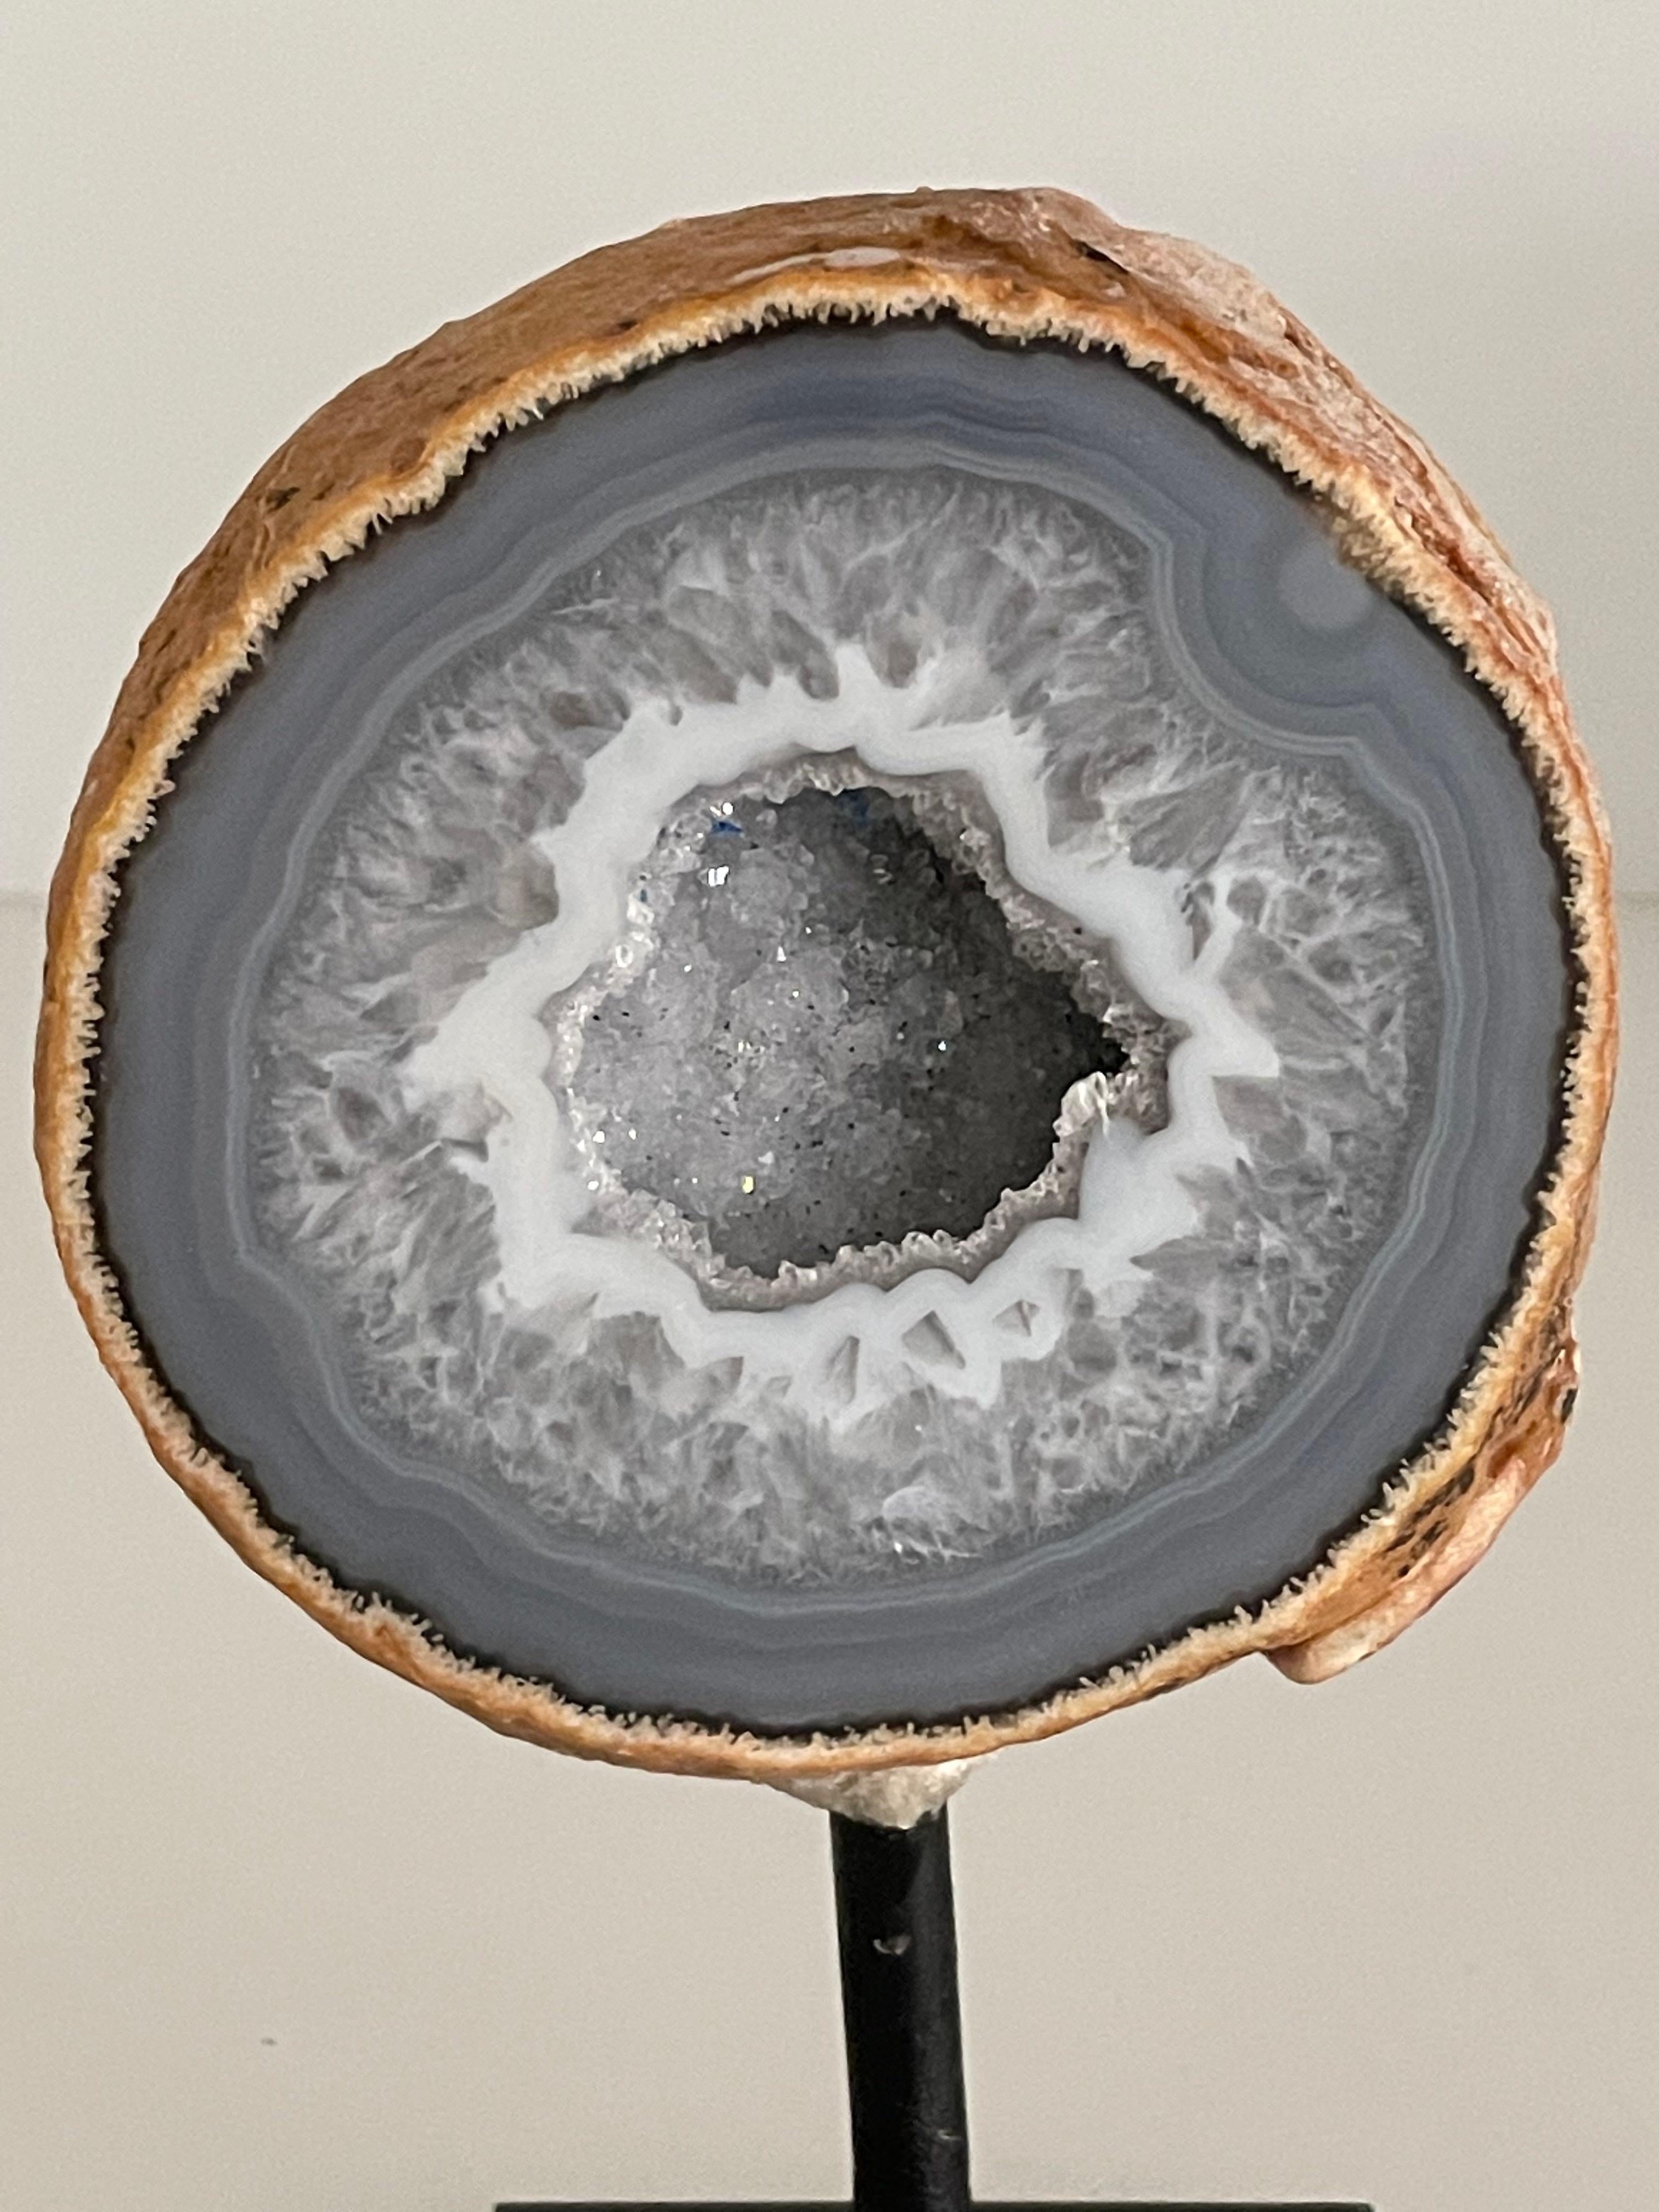 Brazilian Grey Thick Slice of Agate Sculpture on Stand, Brazil, Prehistoric